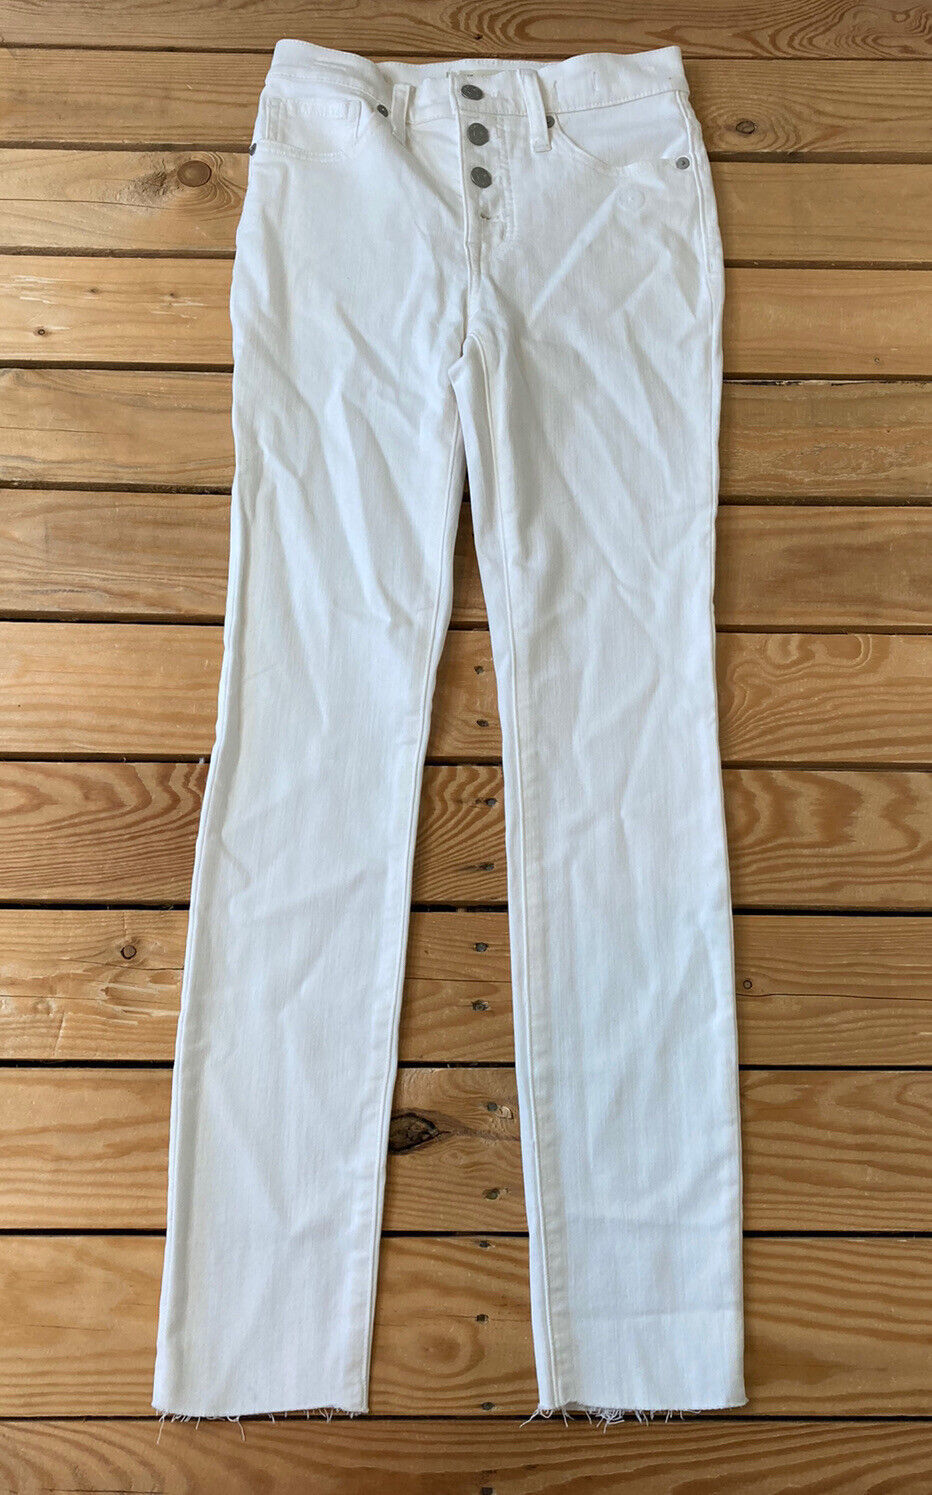 Primary image for Madewell NWT Women’s 9” Mid Rise Skinny Jeans Size 24 White J9